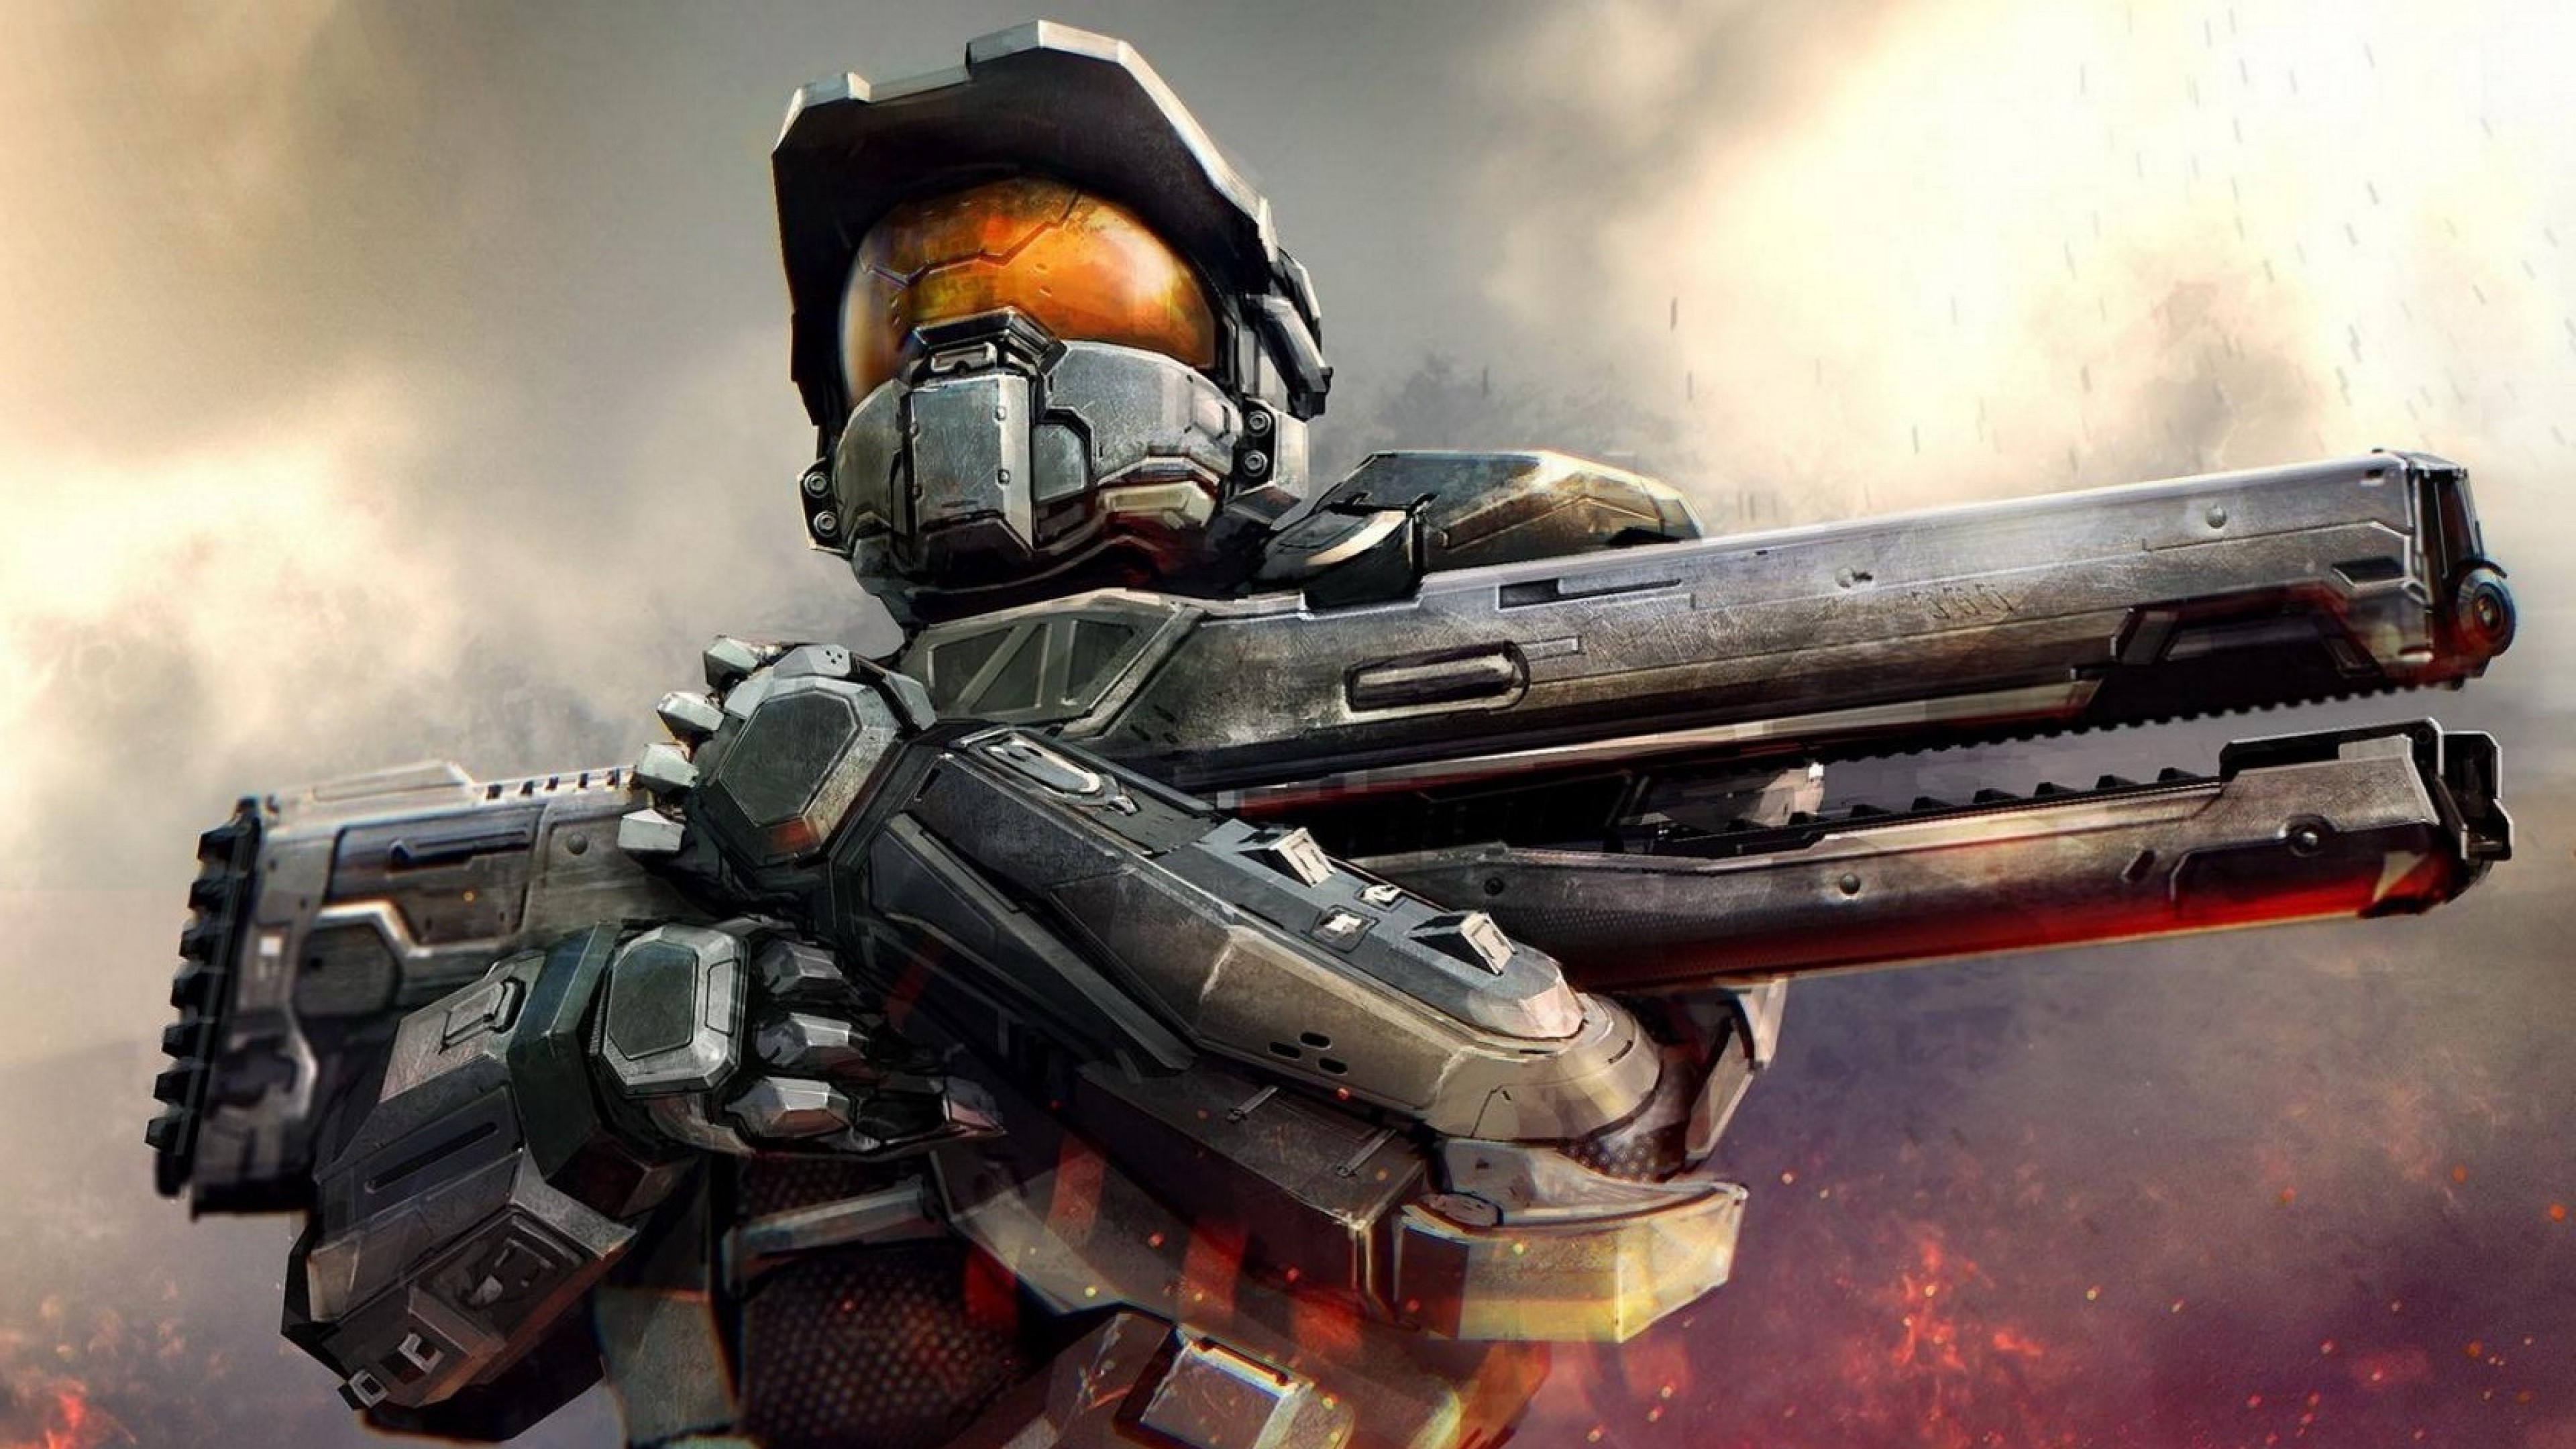 Halo, Master Chief, Halo 4, Xbox One, Video Games Wallpapers HD ...